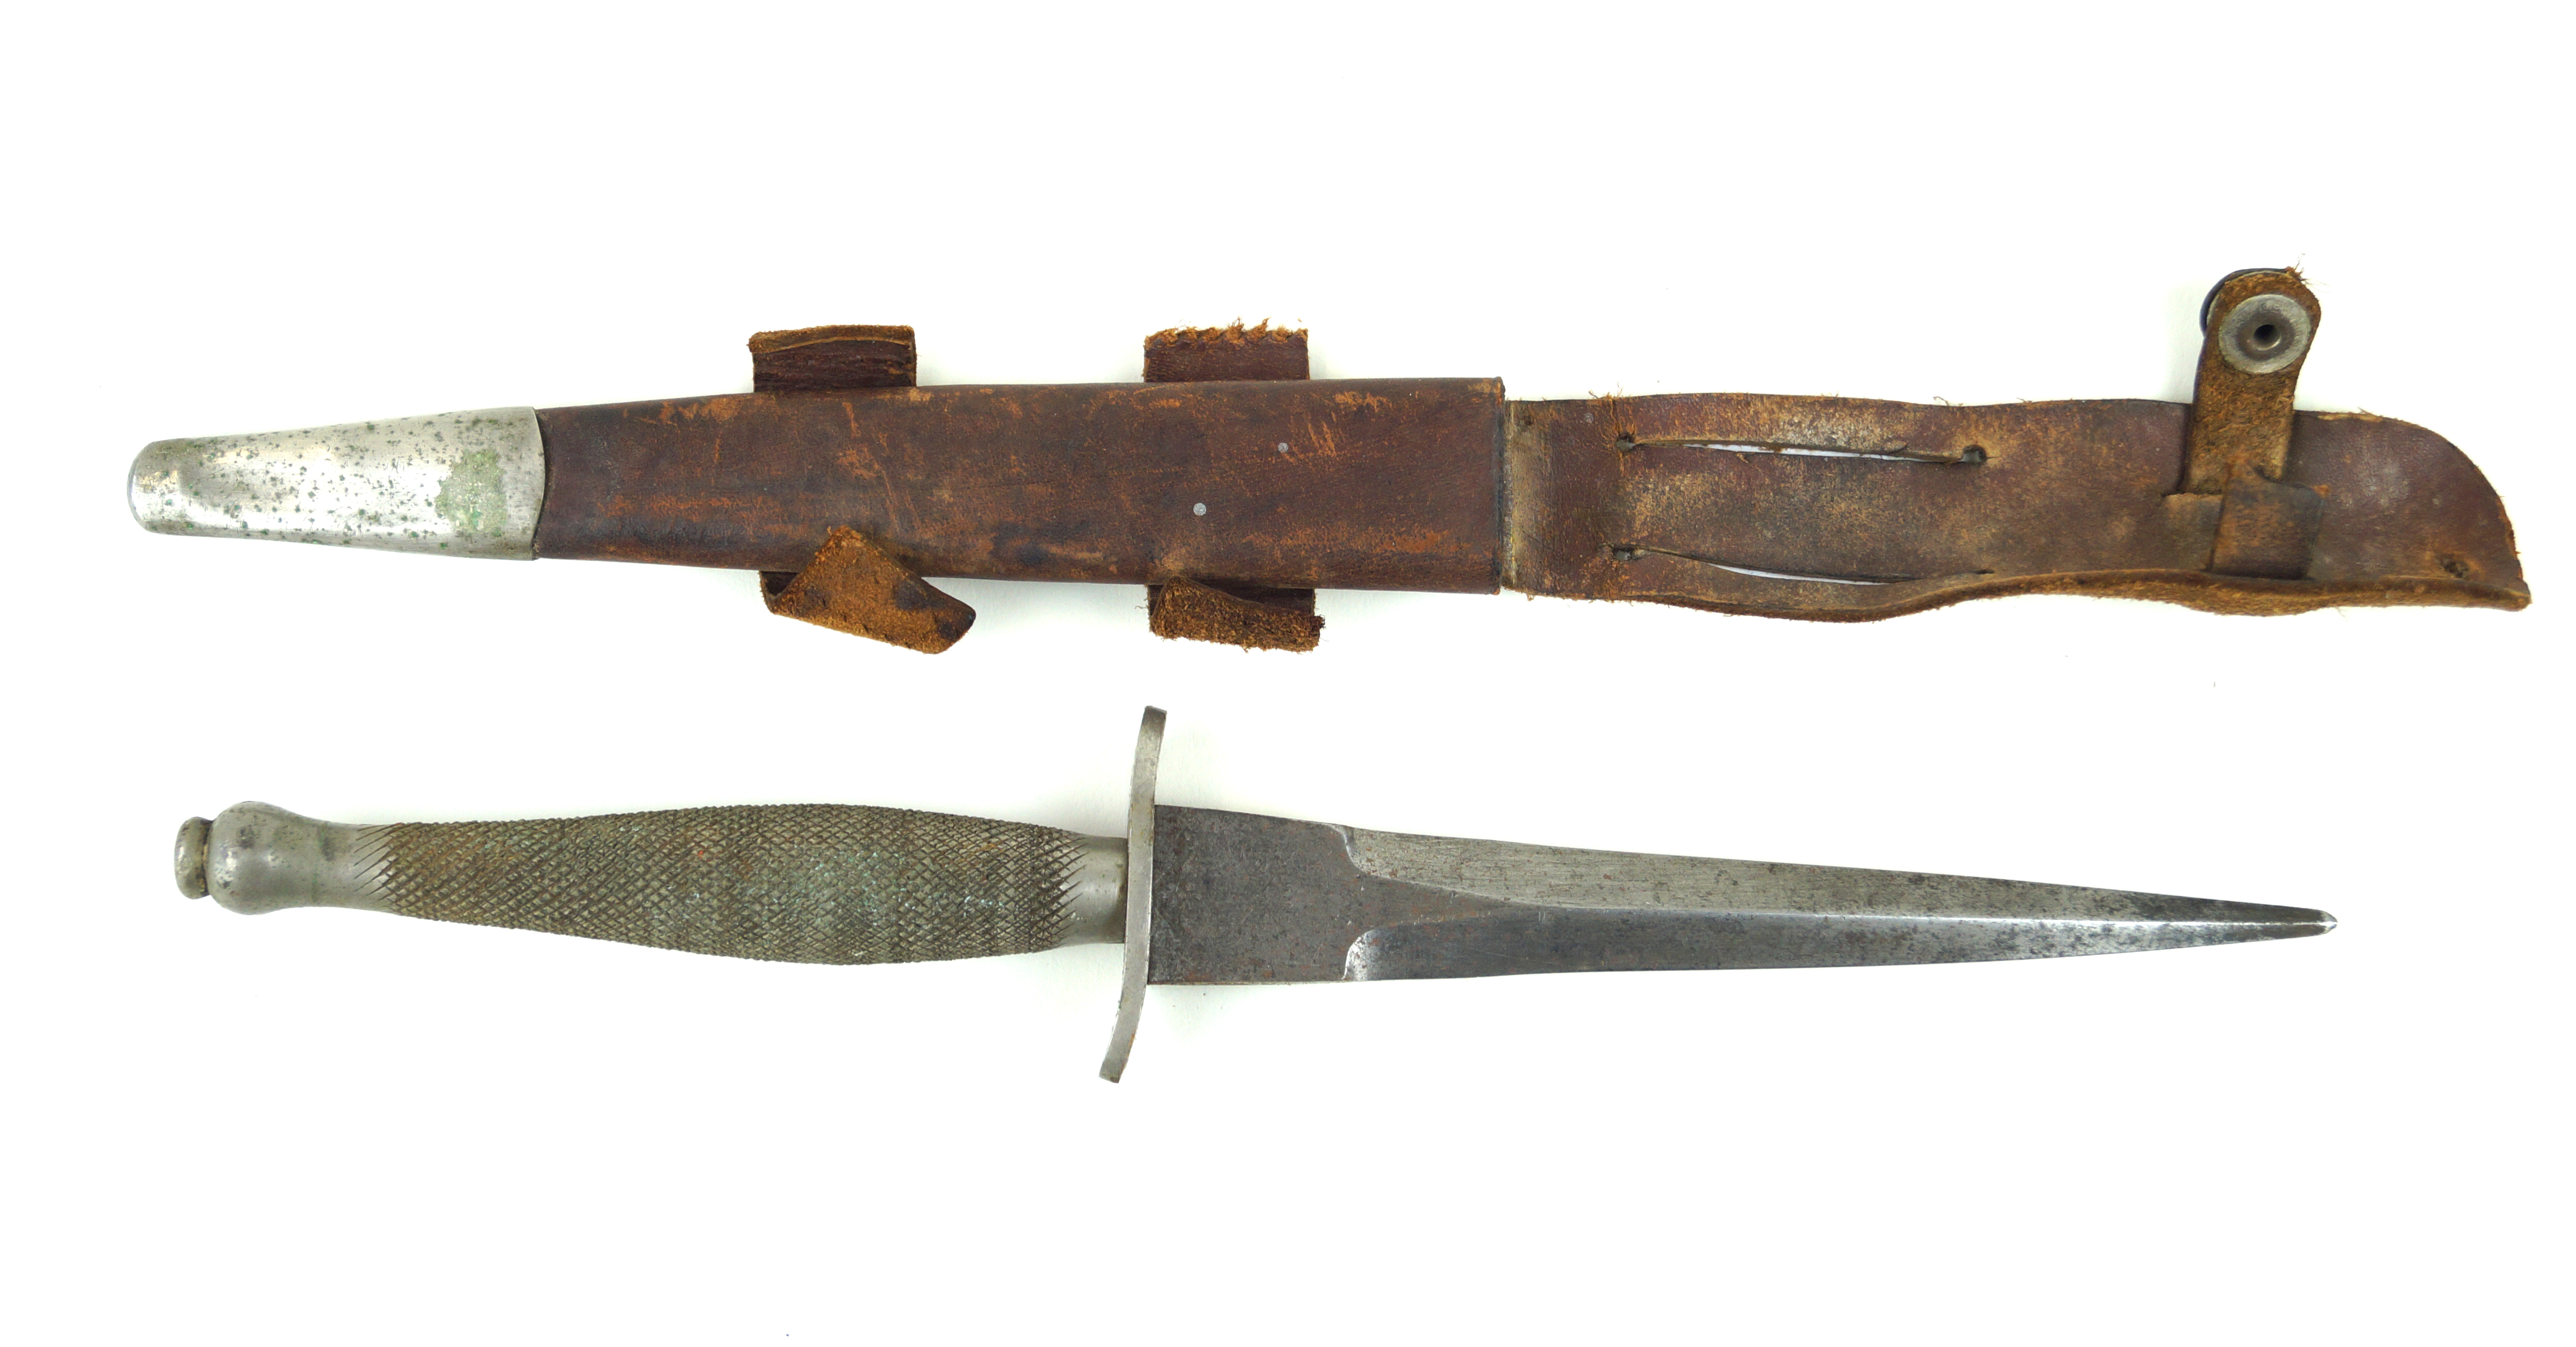 A Fairburn-Sykes first pattern fighting knife c.